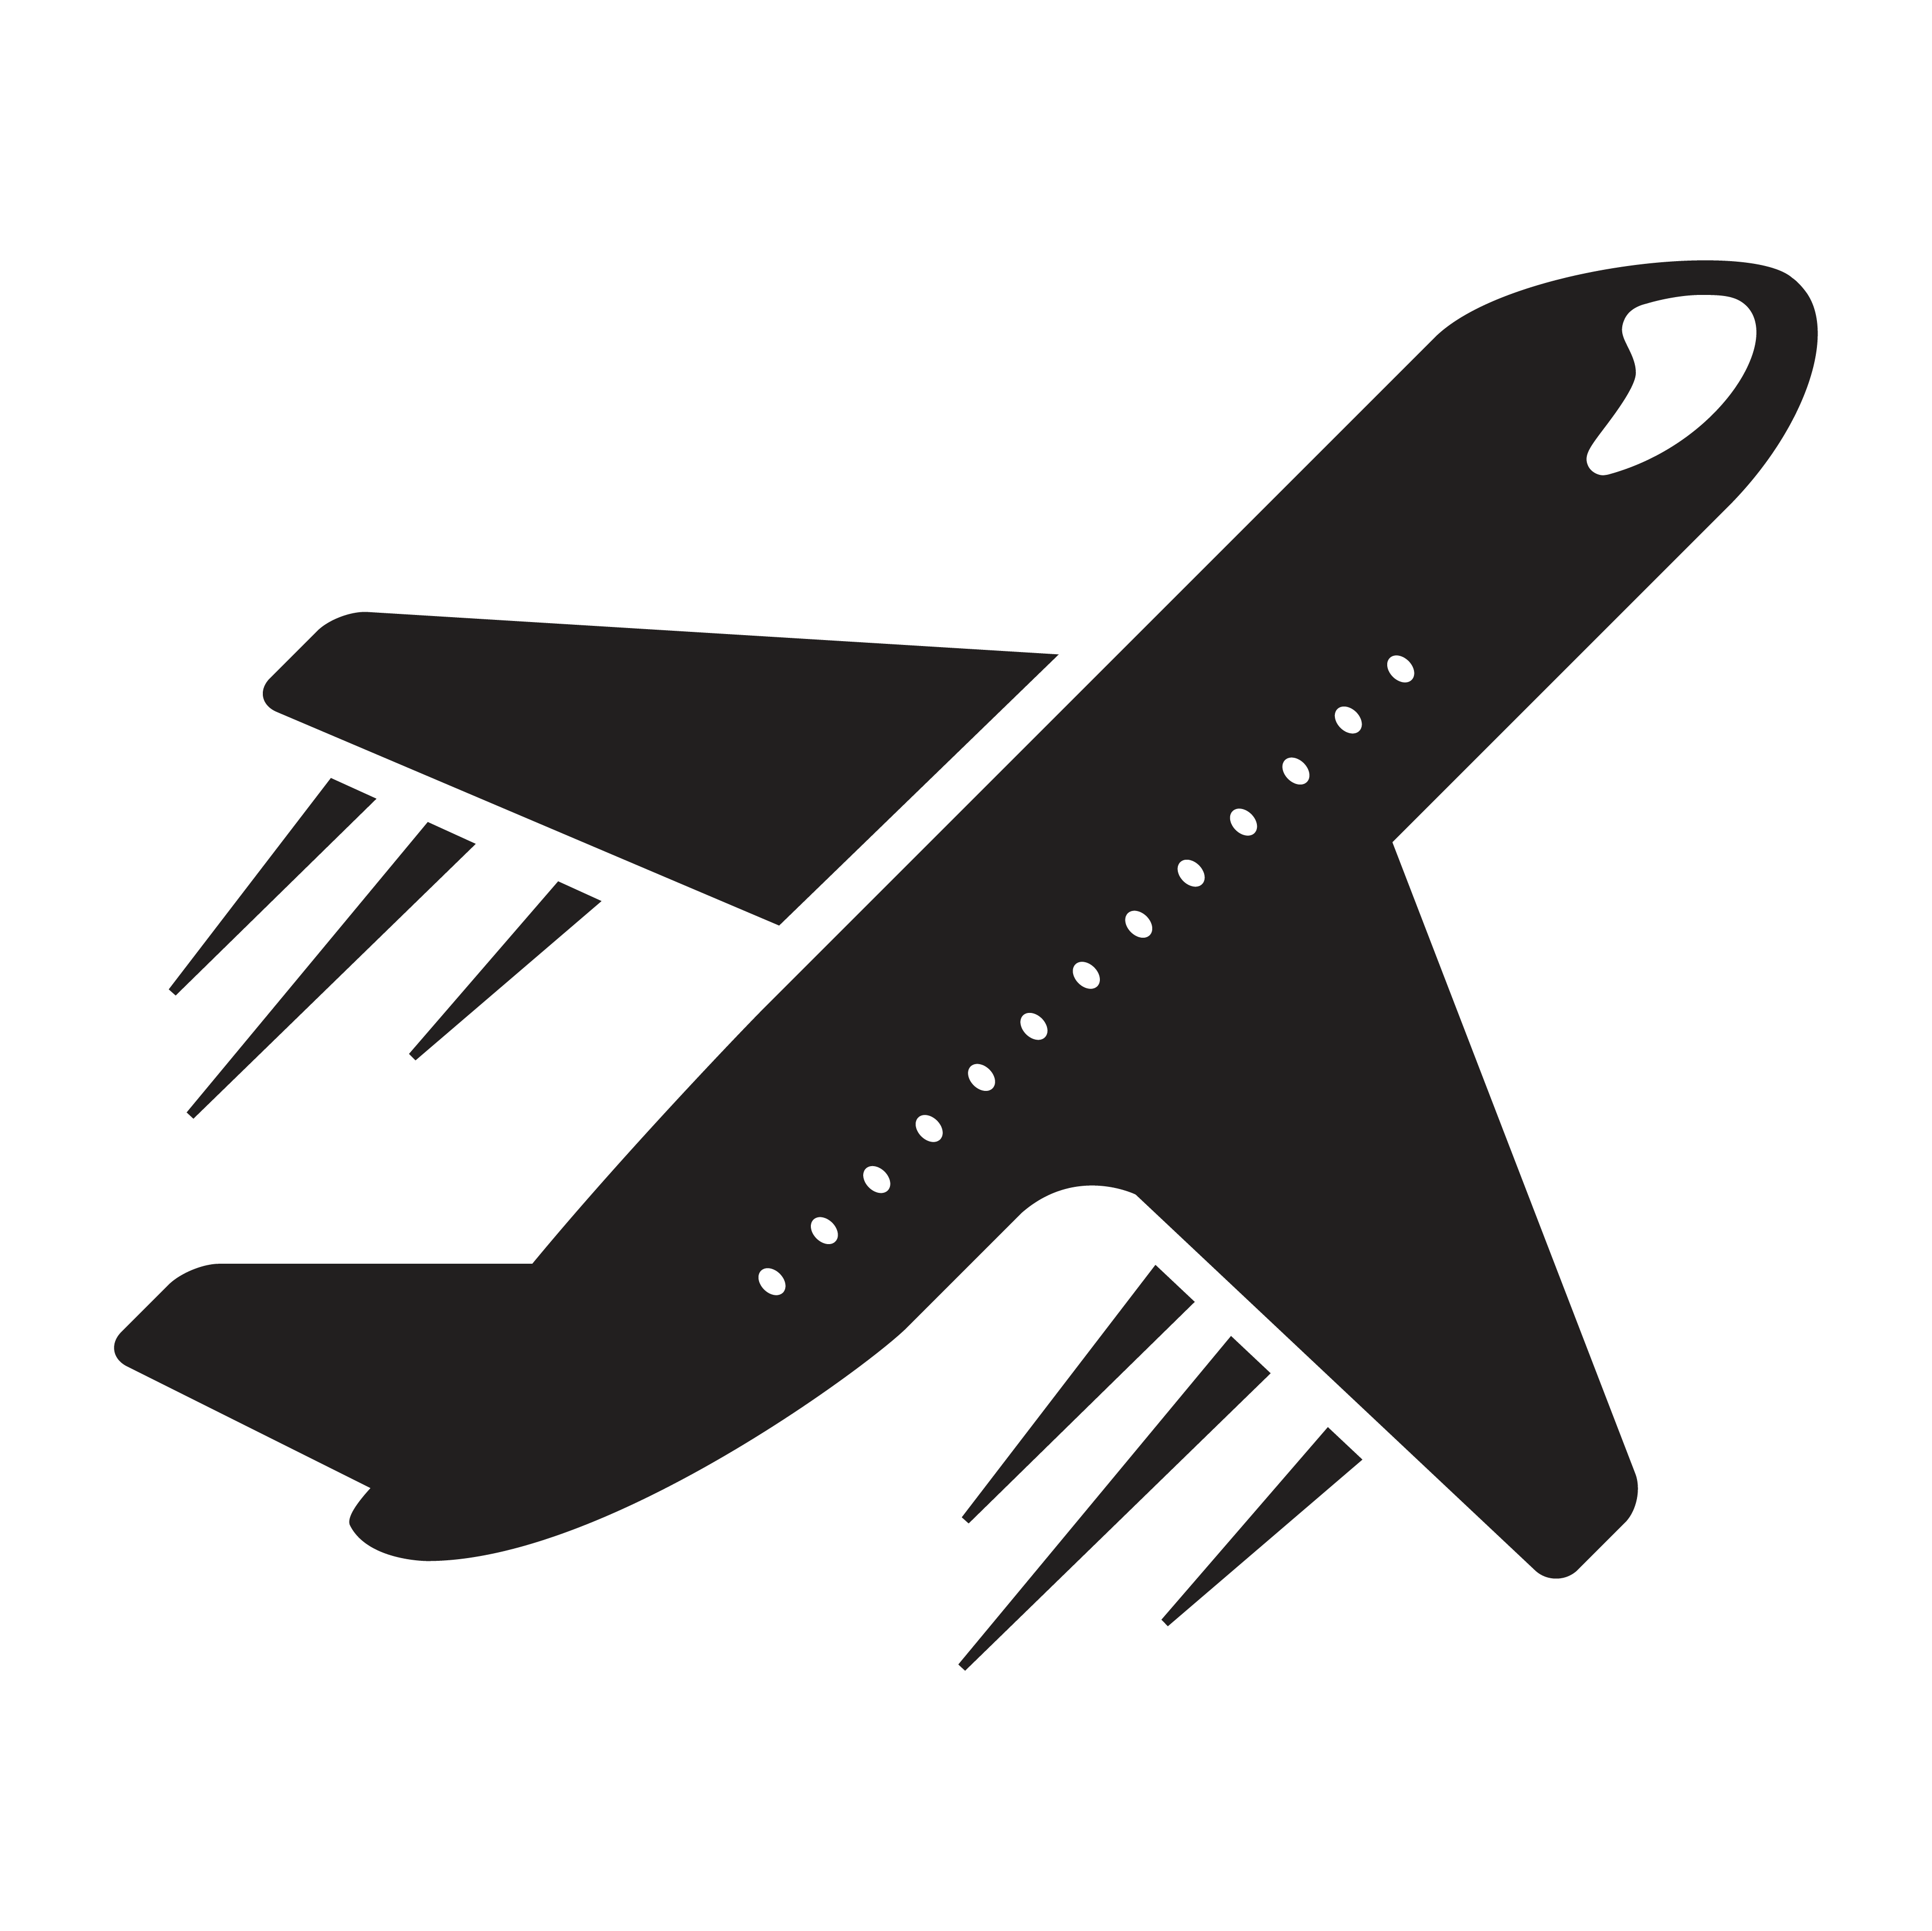 icon of an airplane